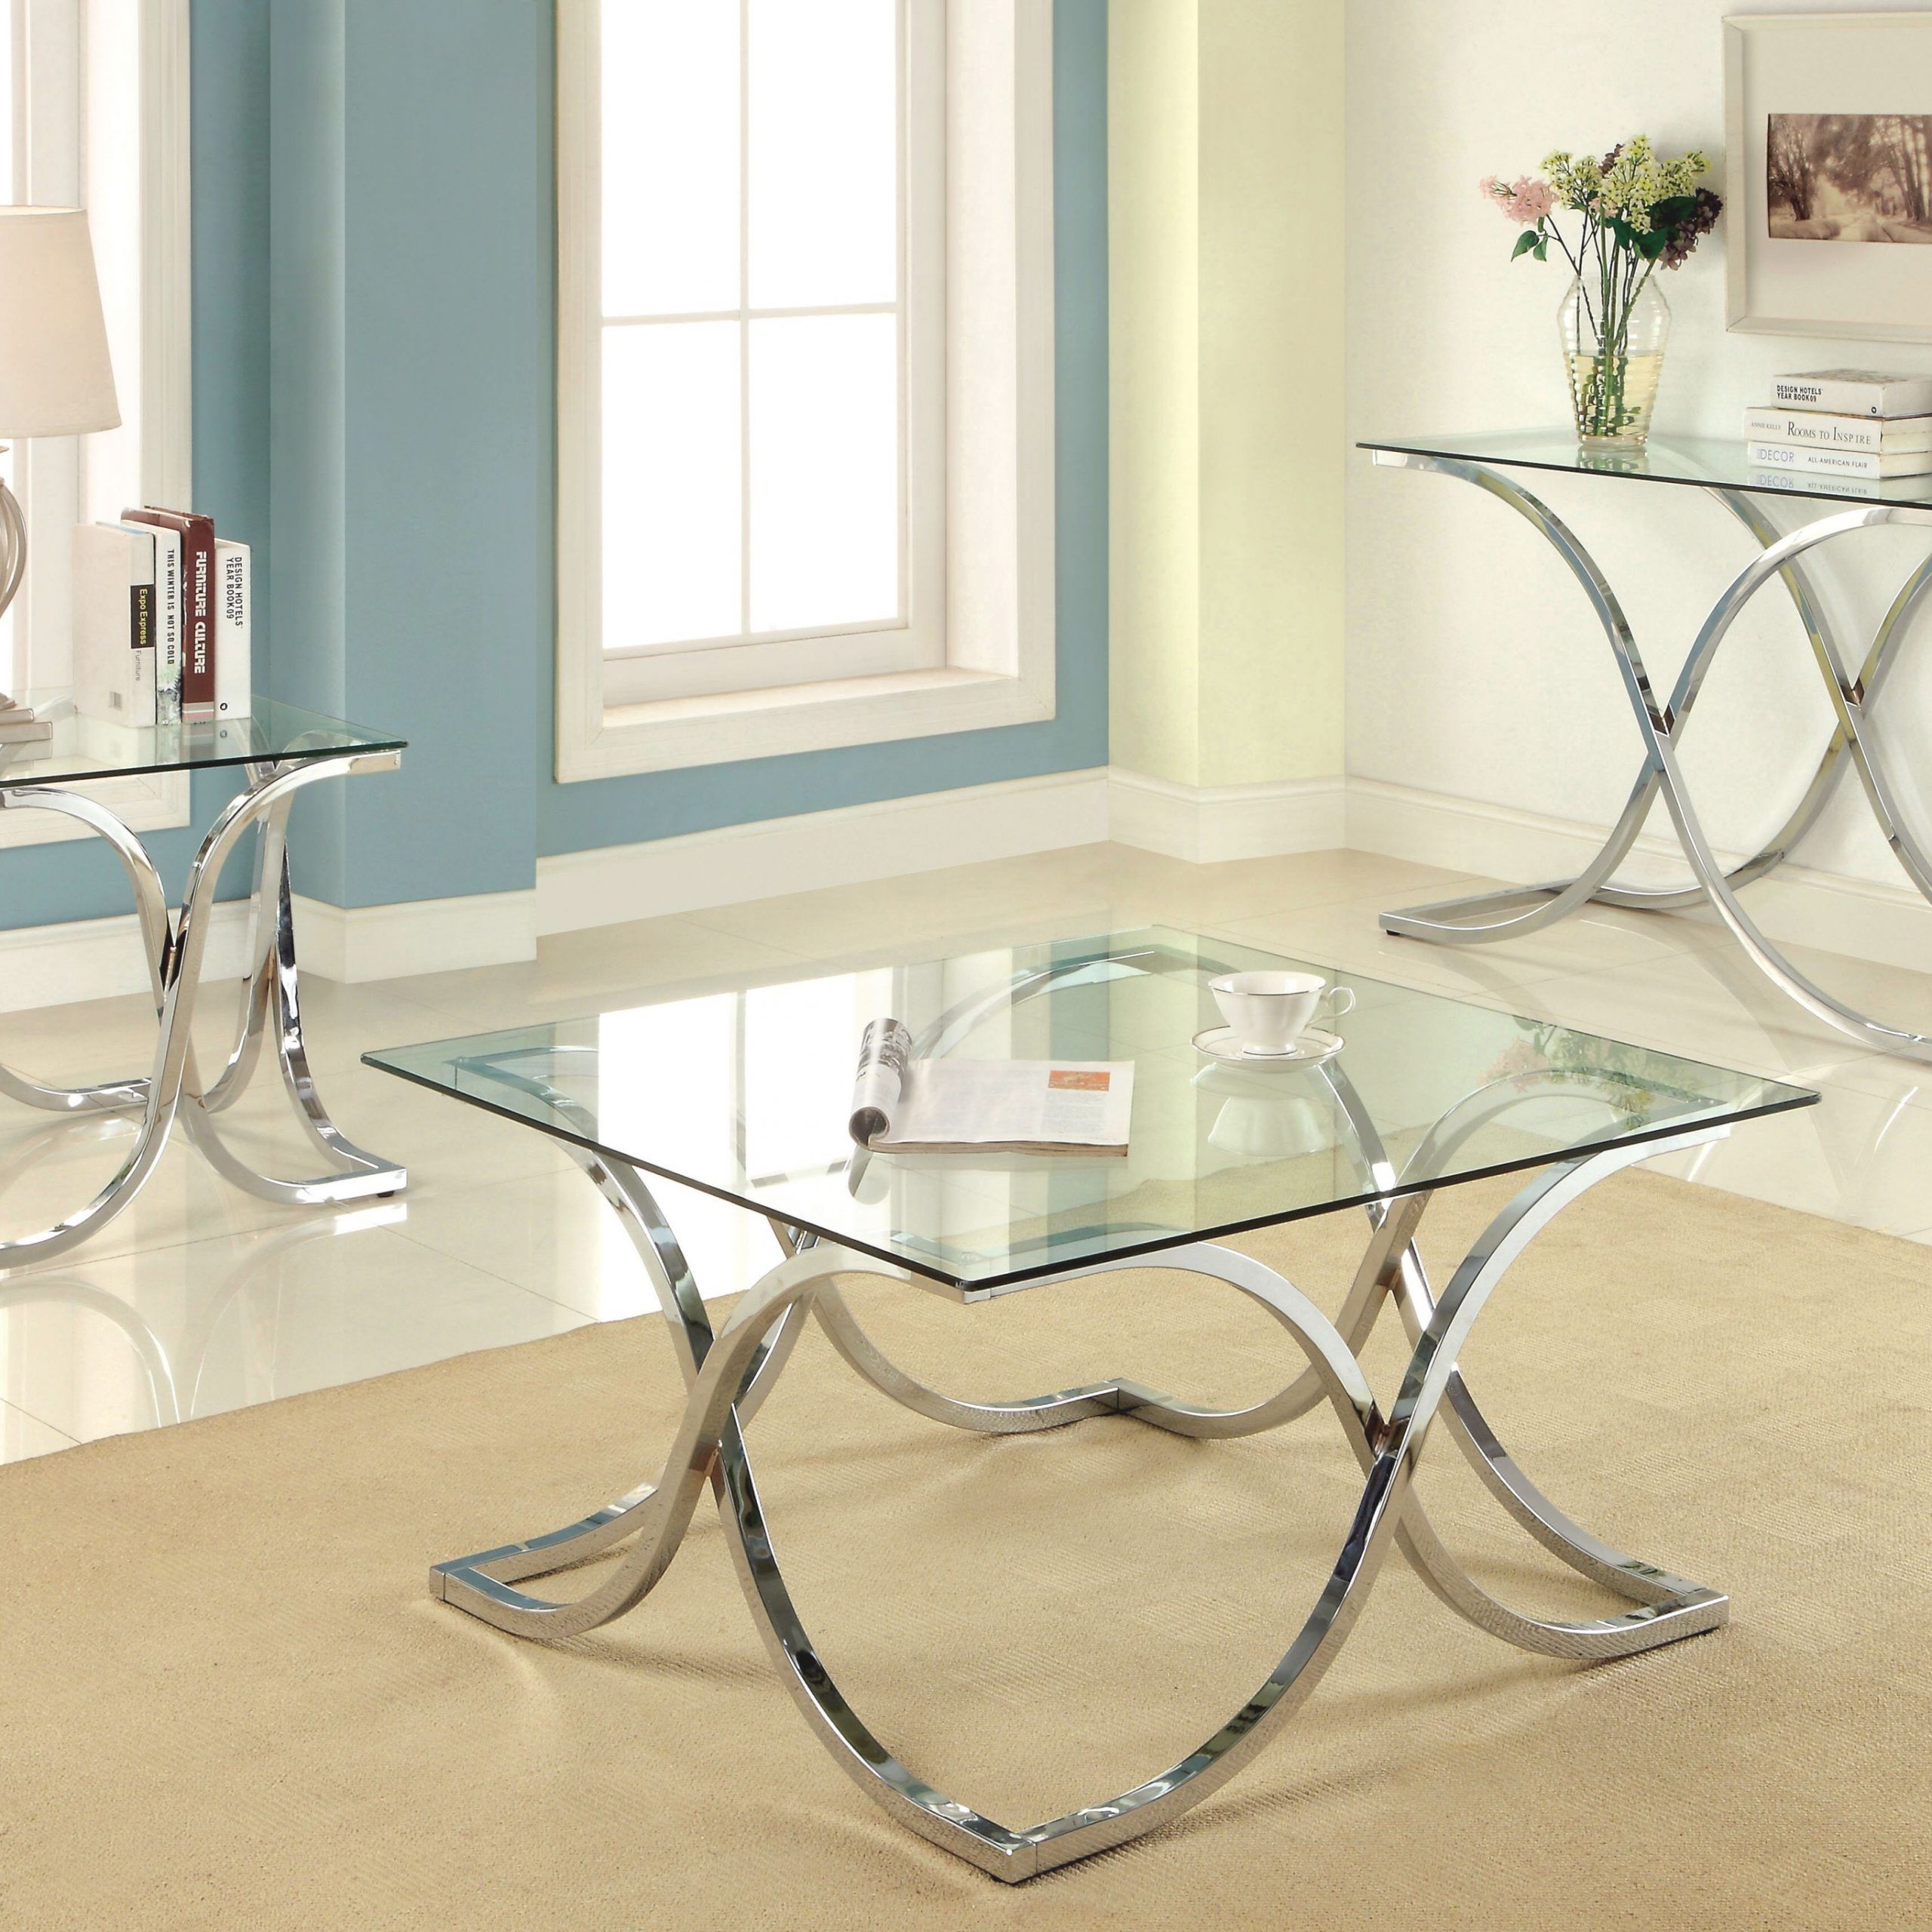 Elegant 3 Piece Glass Coffee Table Set – Awesome Decors Intended For 3 Piece Coffee Tables (View 3 of 15)